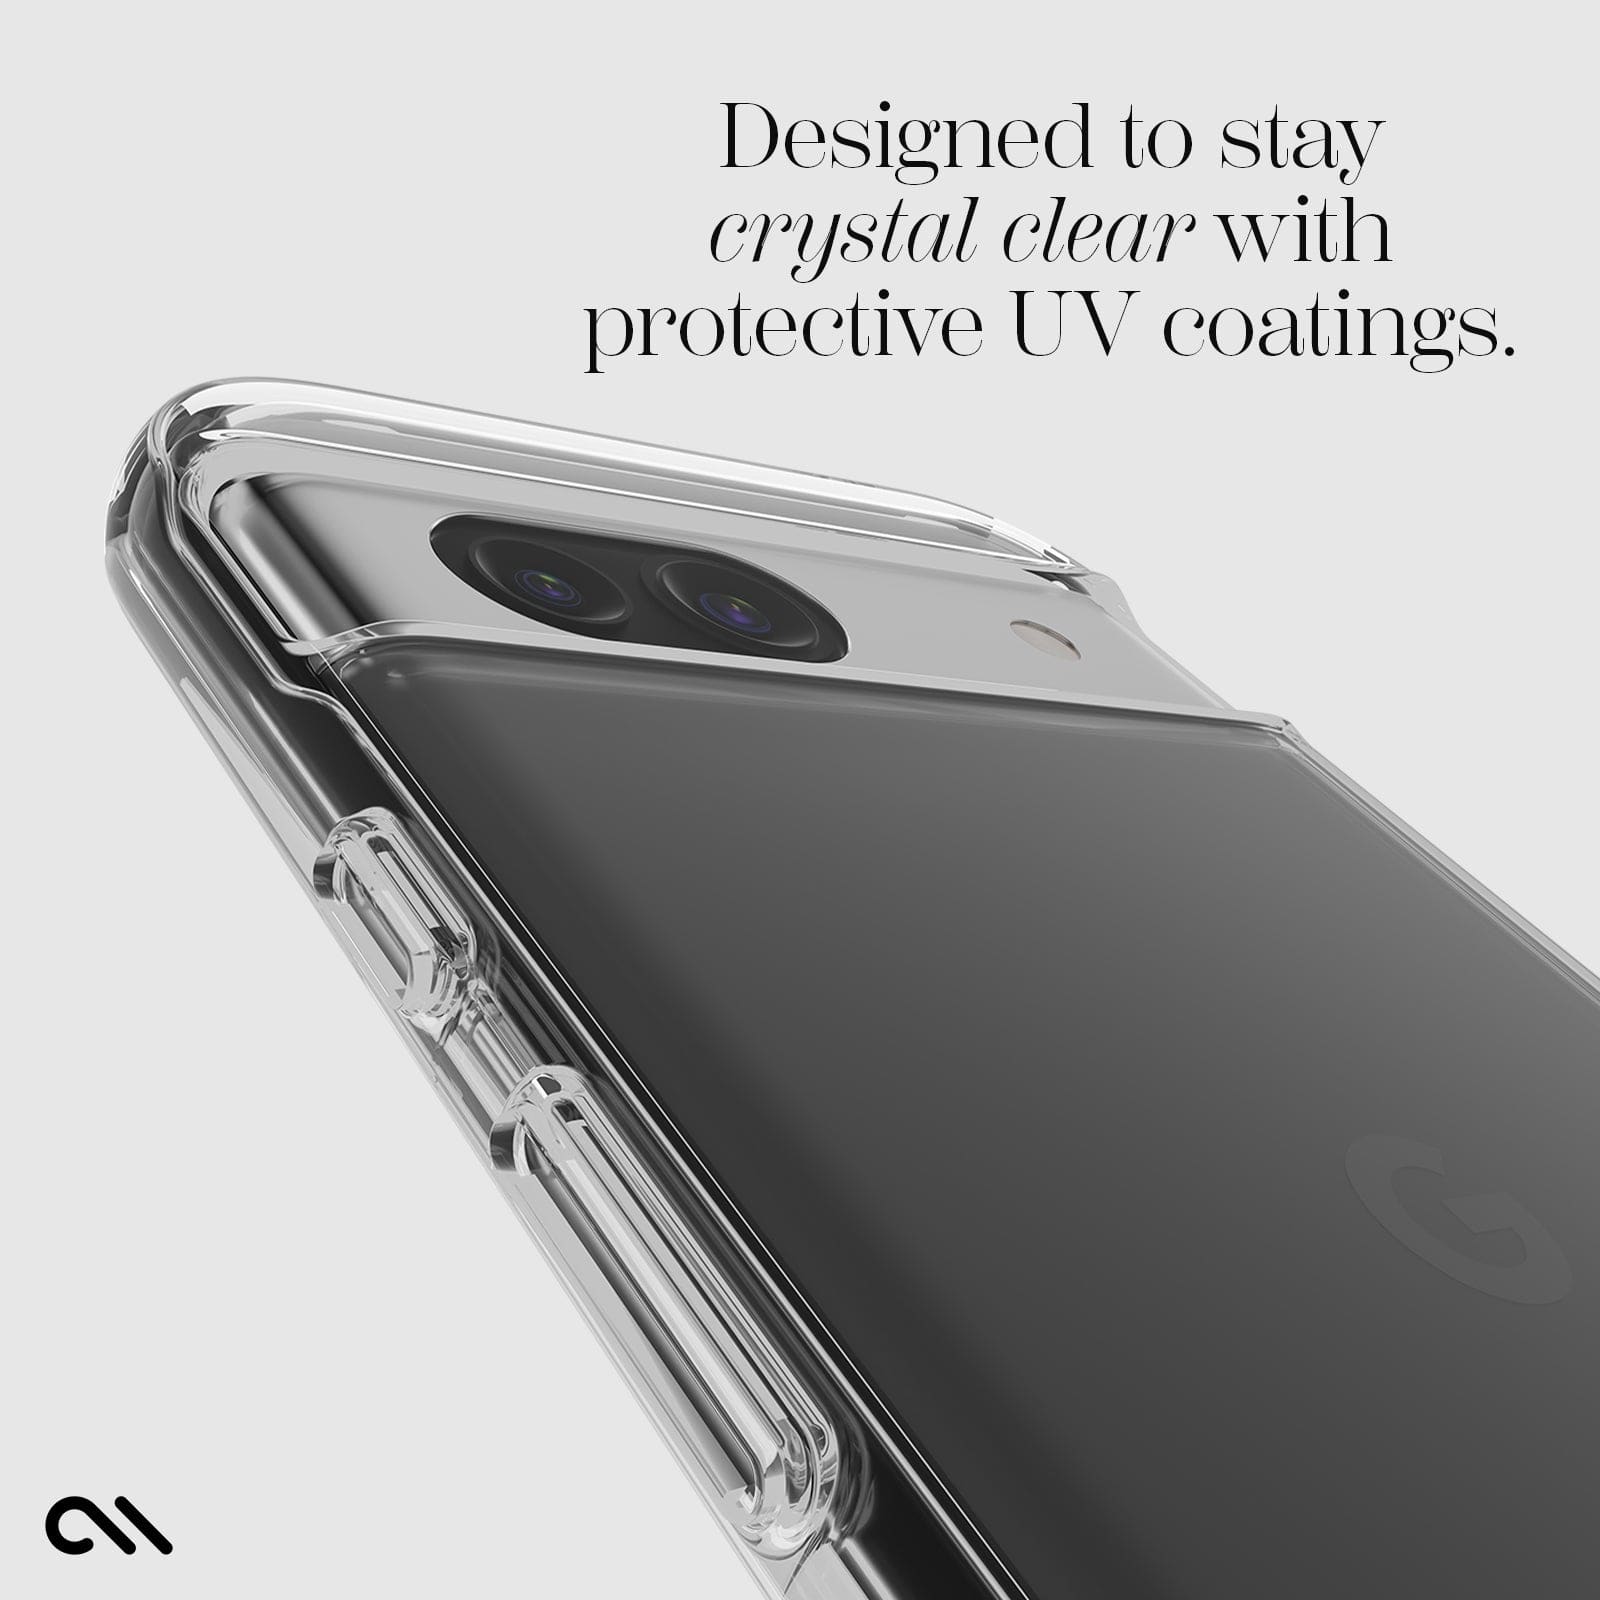 designed to stay crystal clear with uv protective uv coatings